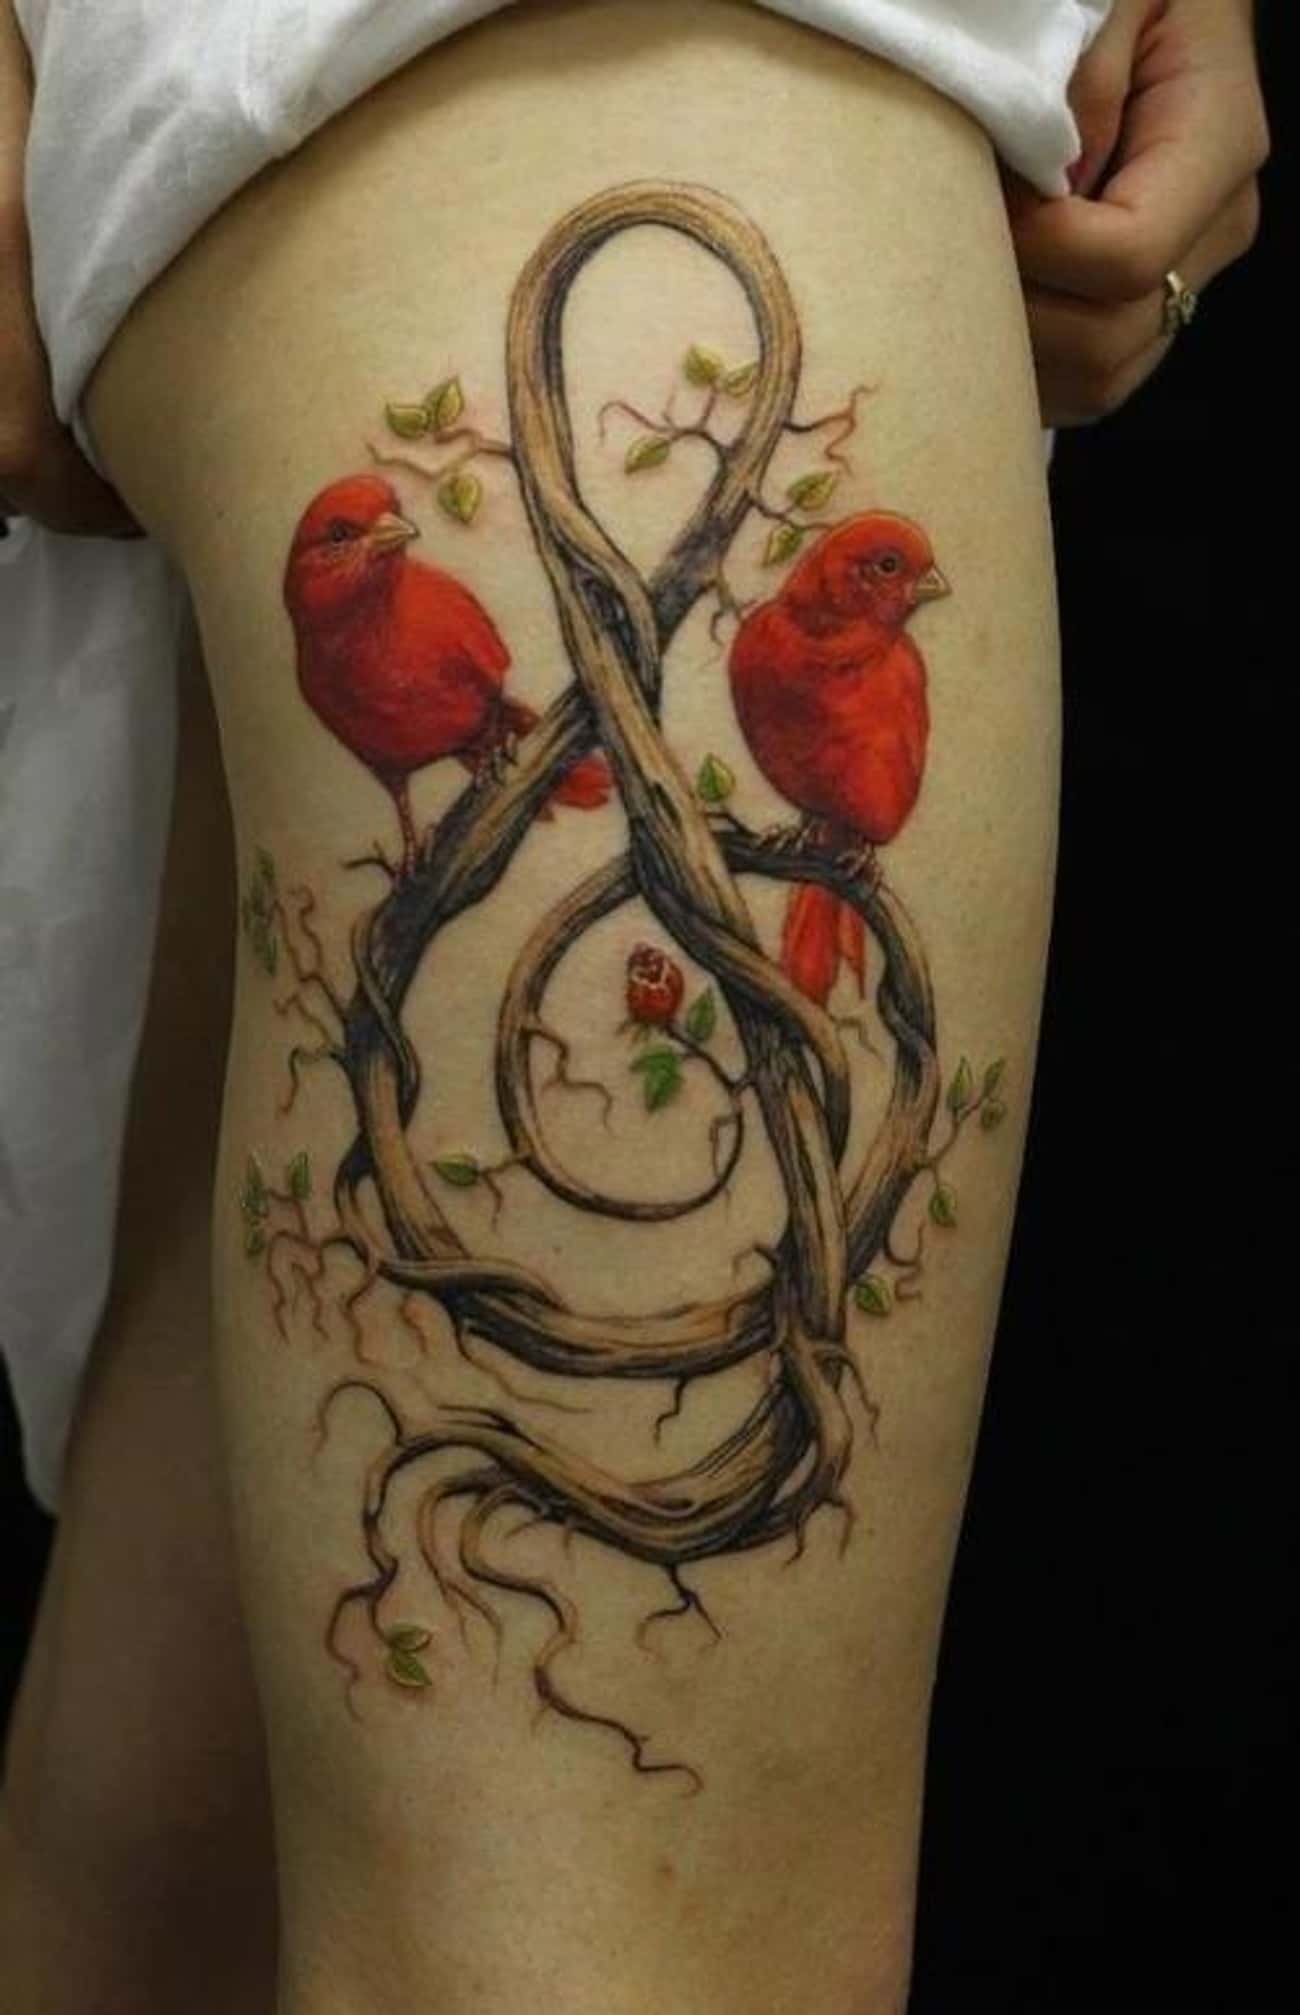 This Intricate Tattoo of Love Birds on a Wooden Treble Clef